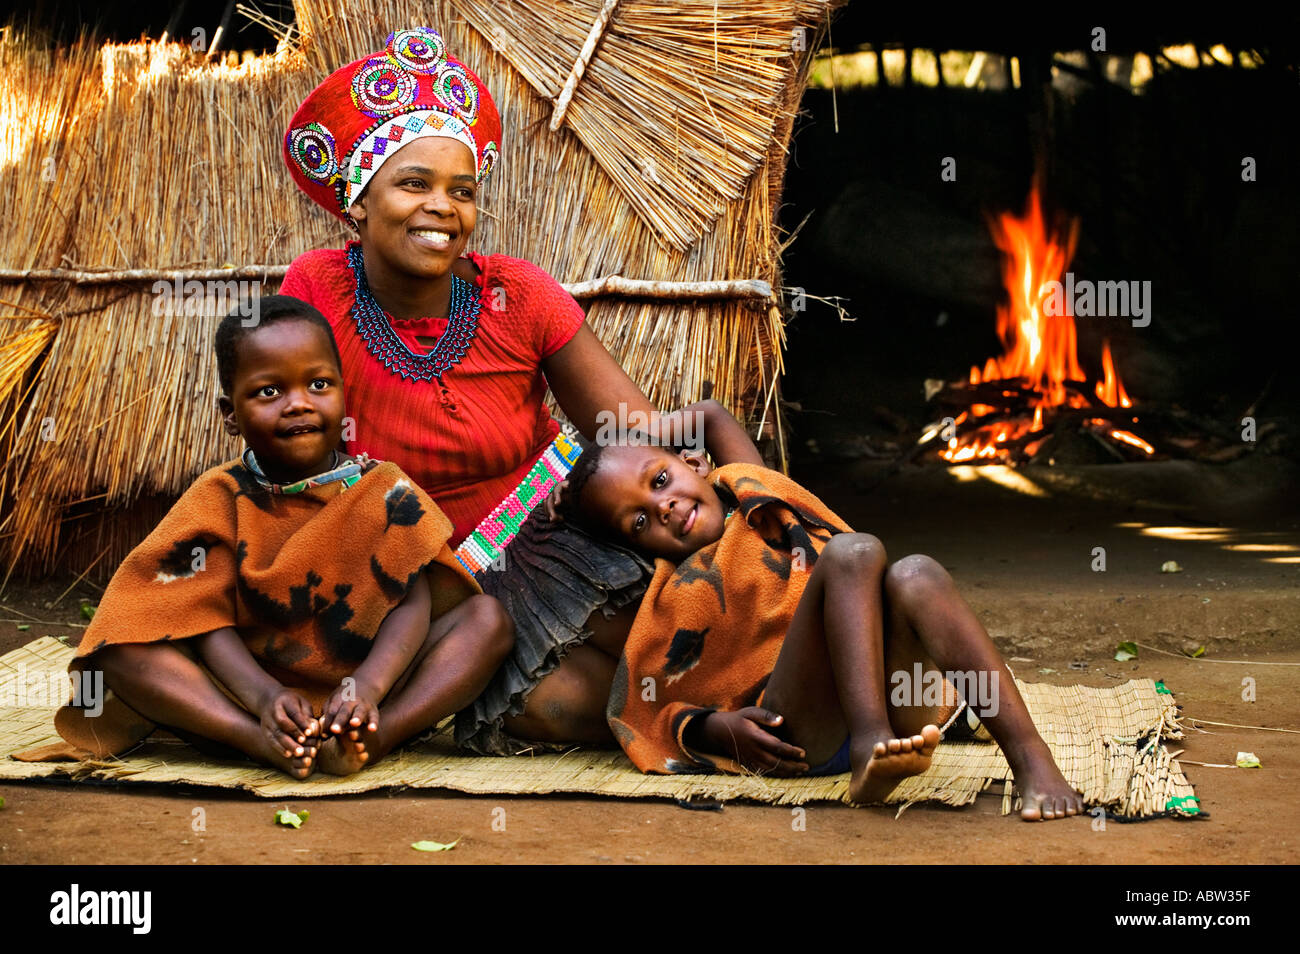 Zulu woman in traditional red headdress married woman with children Beehive hut in background Model released South Africa Stock Photo